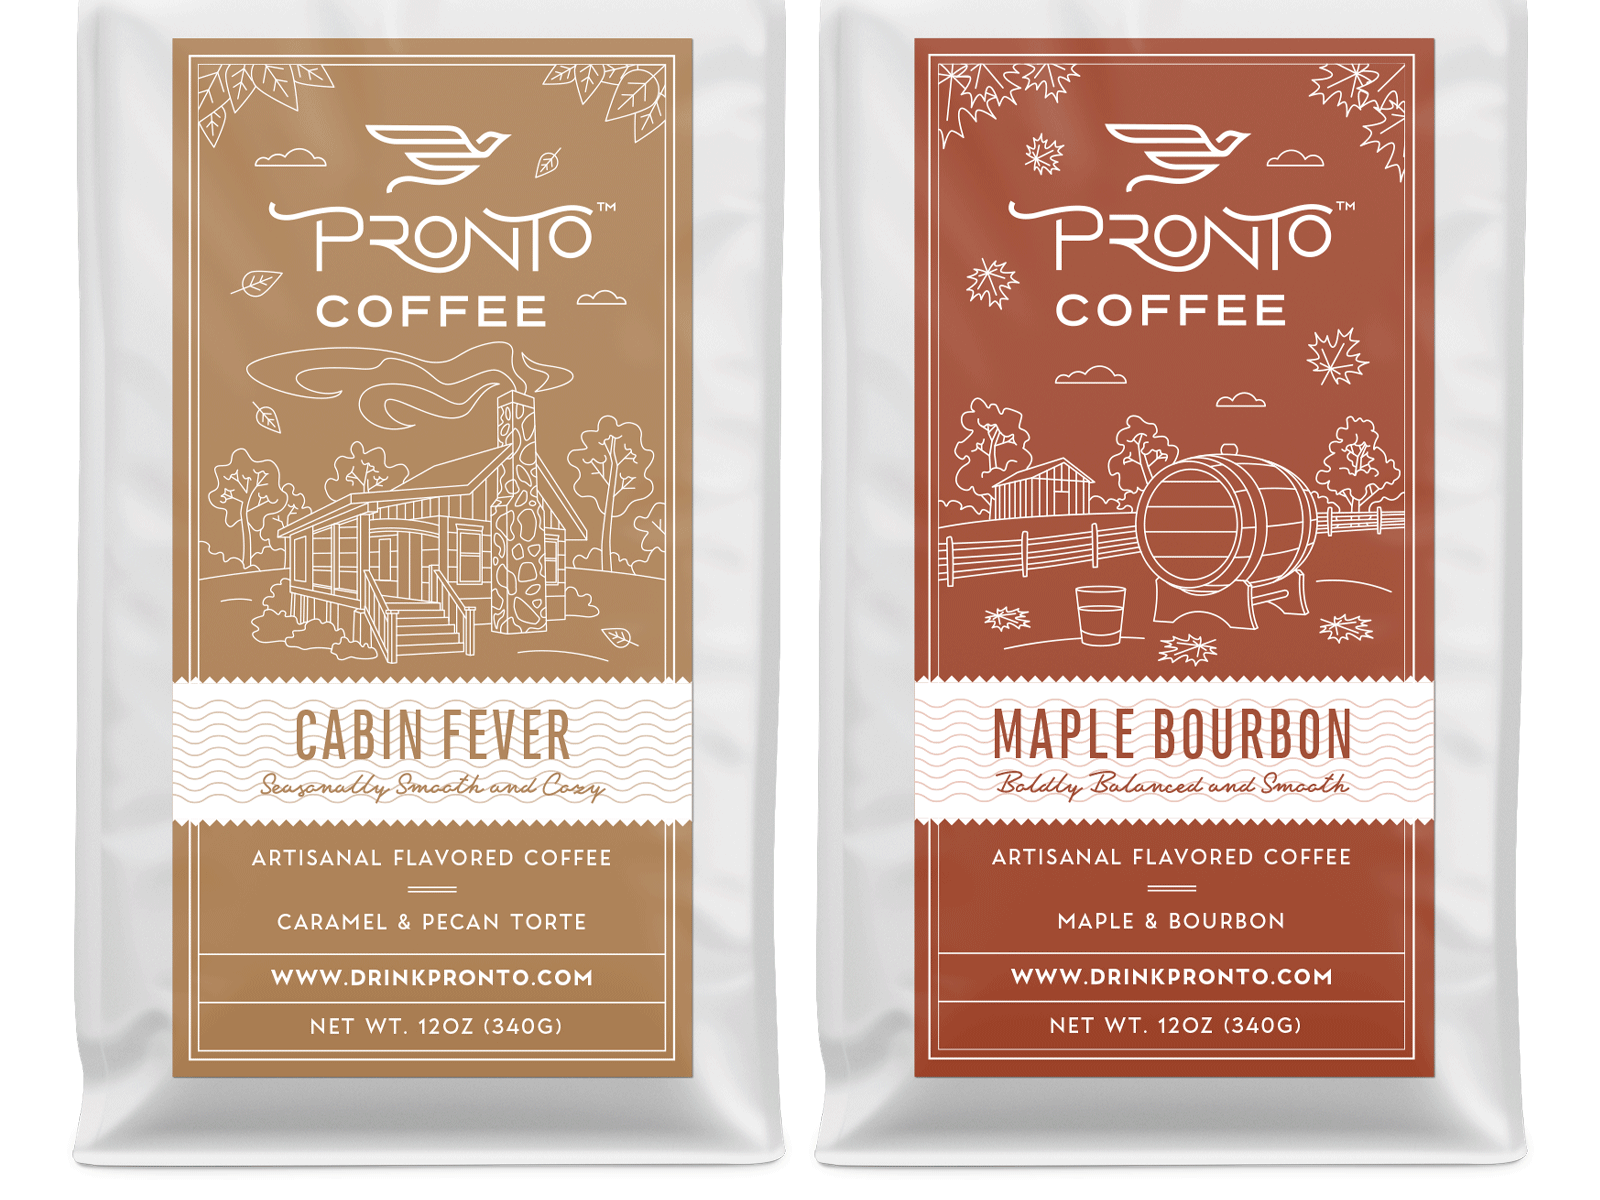 New coffee labels for my recent client